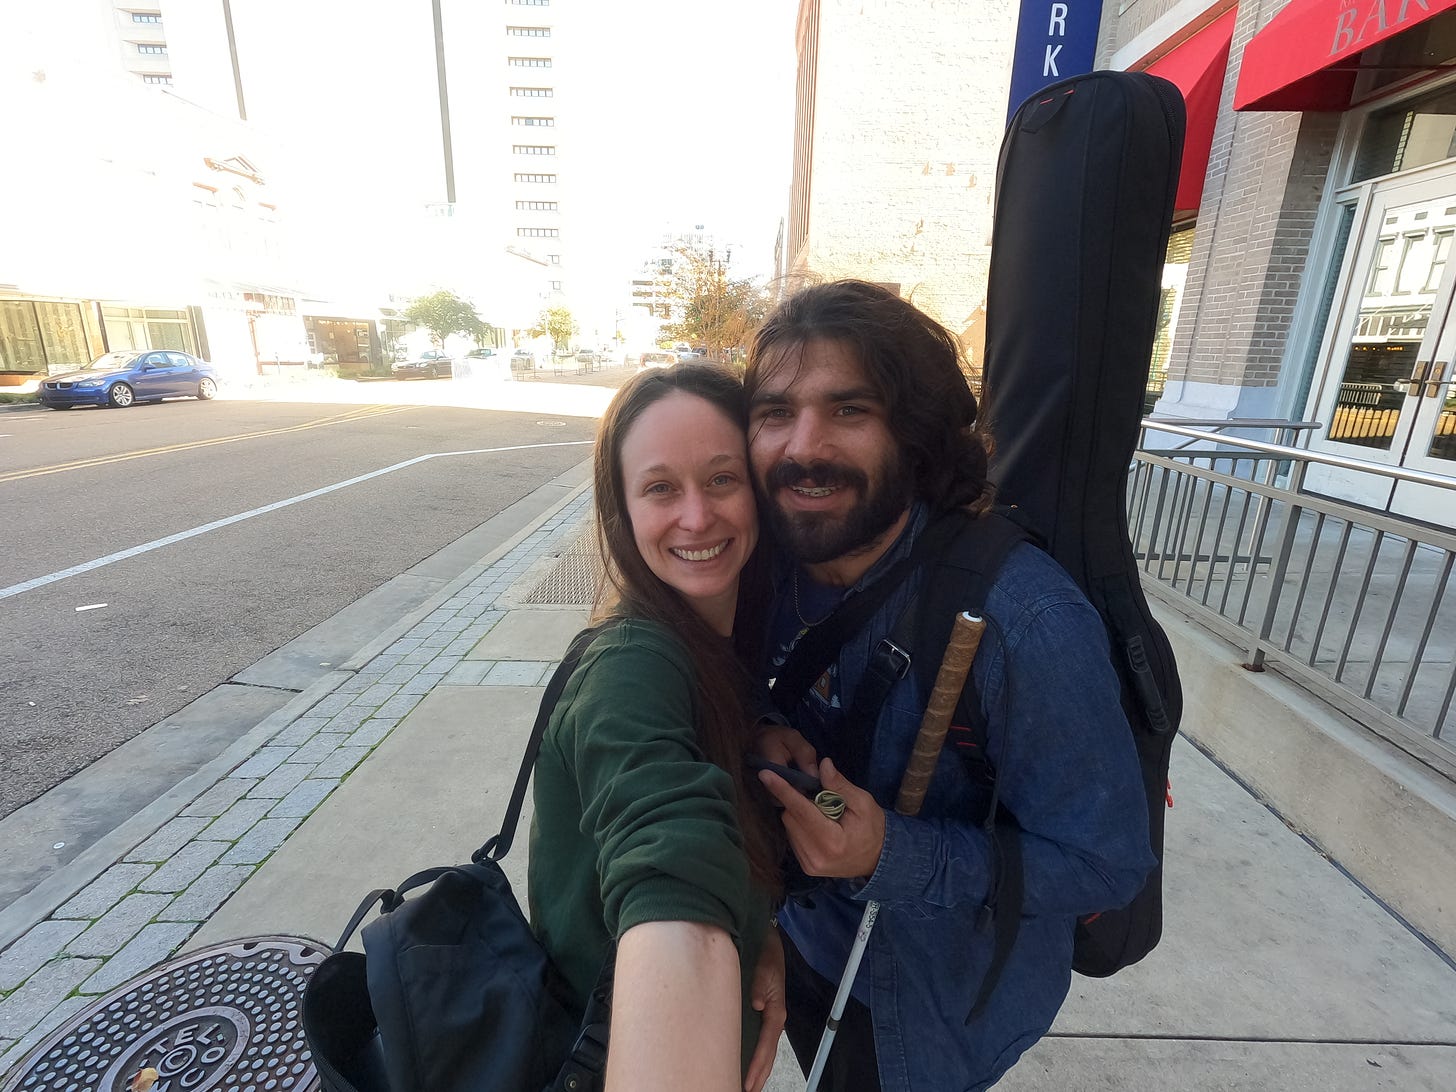 Kelly and Anthony smile so big as they wait for their car - anthony is holding his cane and they are hugging each other